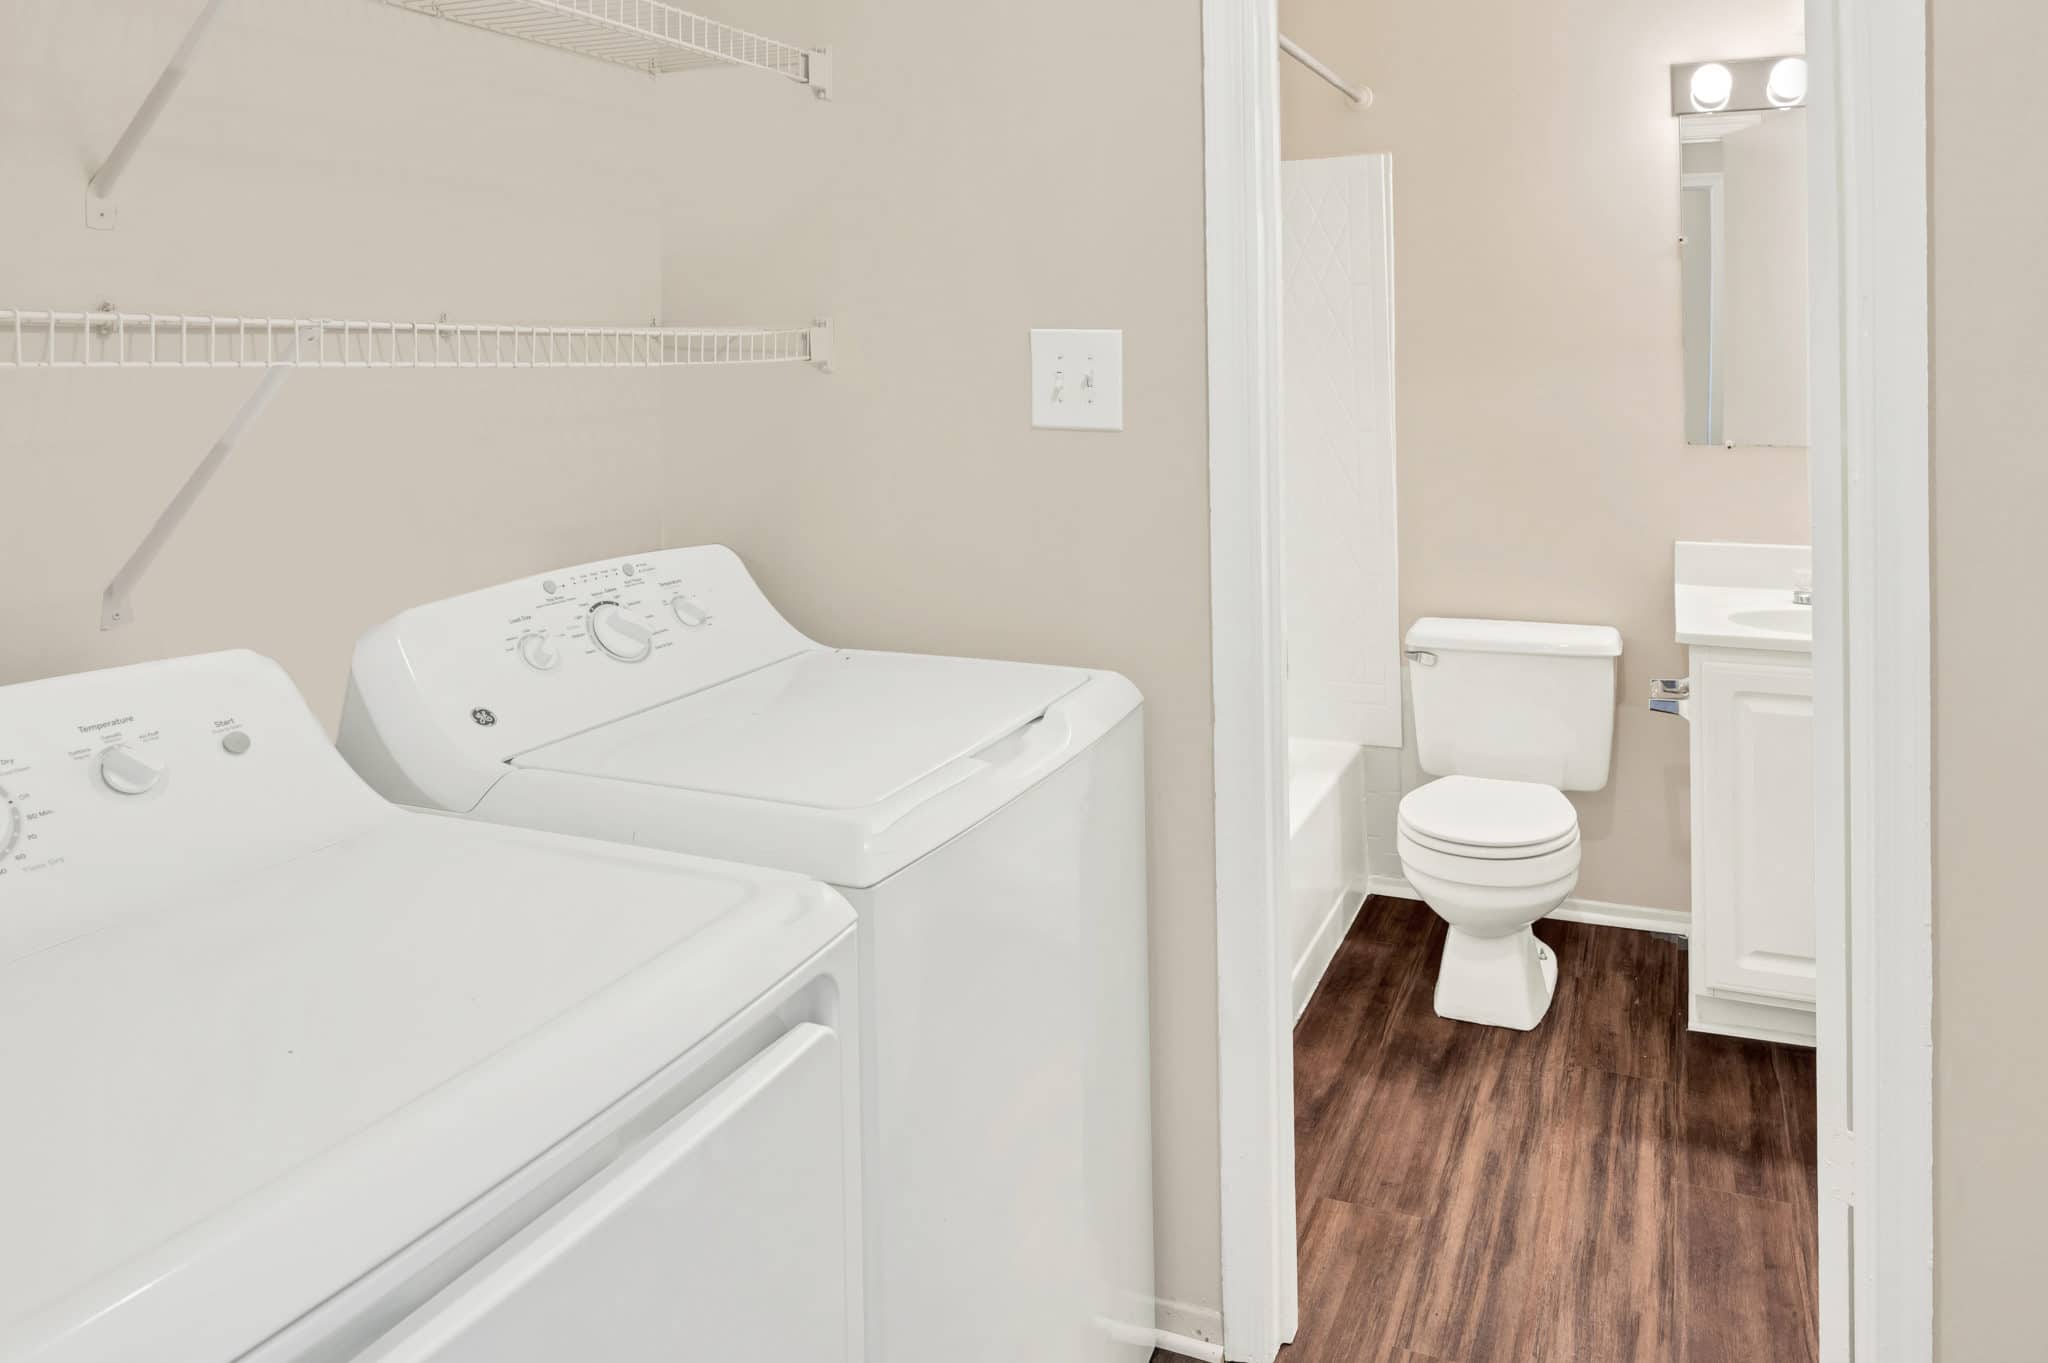 washer and dryer and bathroom at spark waldorf